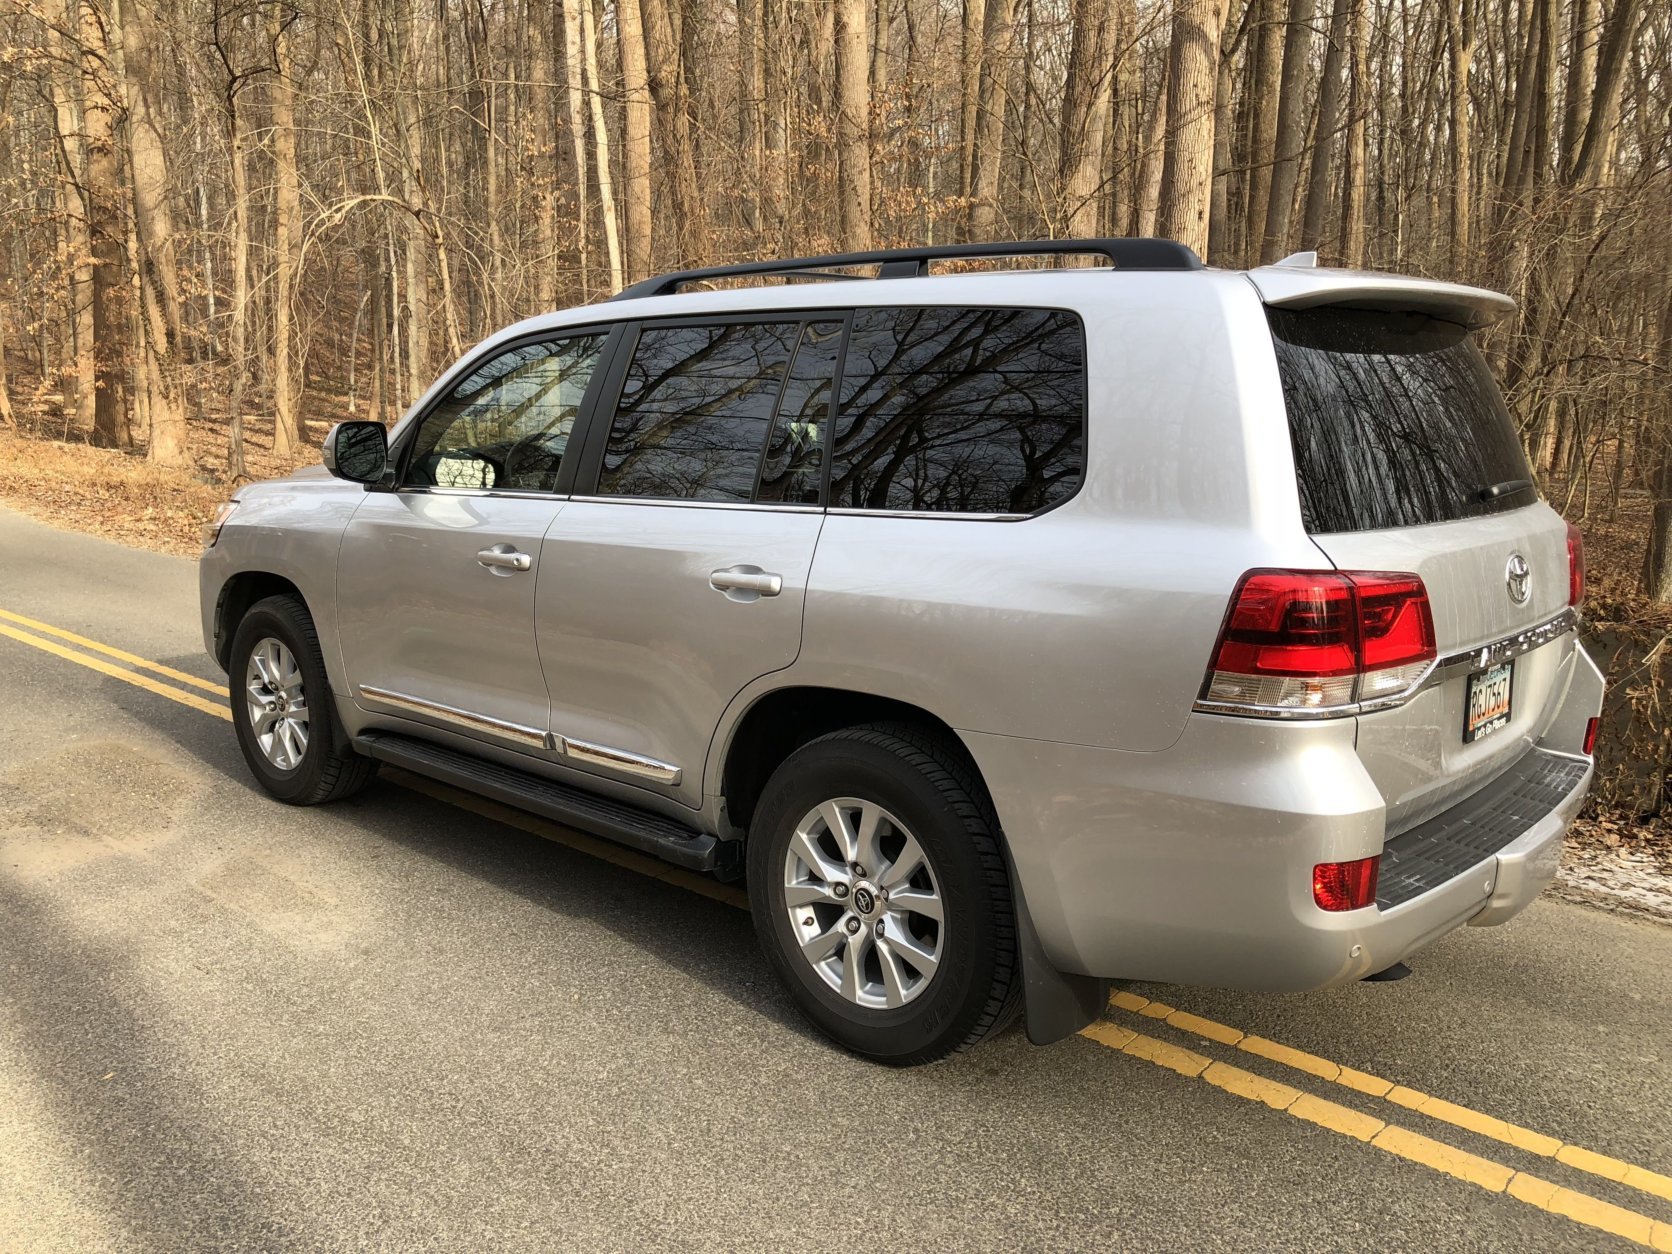 You might already be an owner of a Toyota SUV or crossover. There are many models that sell very well but you might not know about the legendary Land Cruiser. This large SUV is a bit of a throwback to a time when SUVs could go anywhere and pamper the people riding inside. (WTOP/Mike Parris)